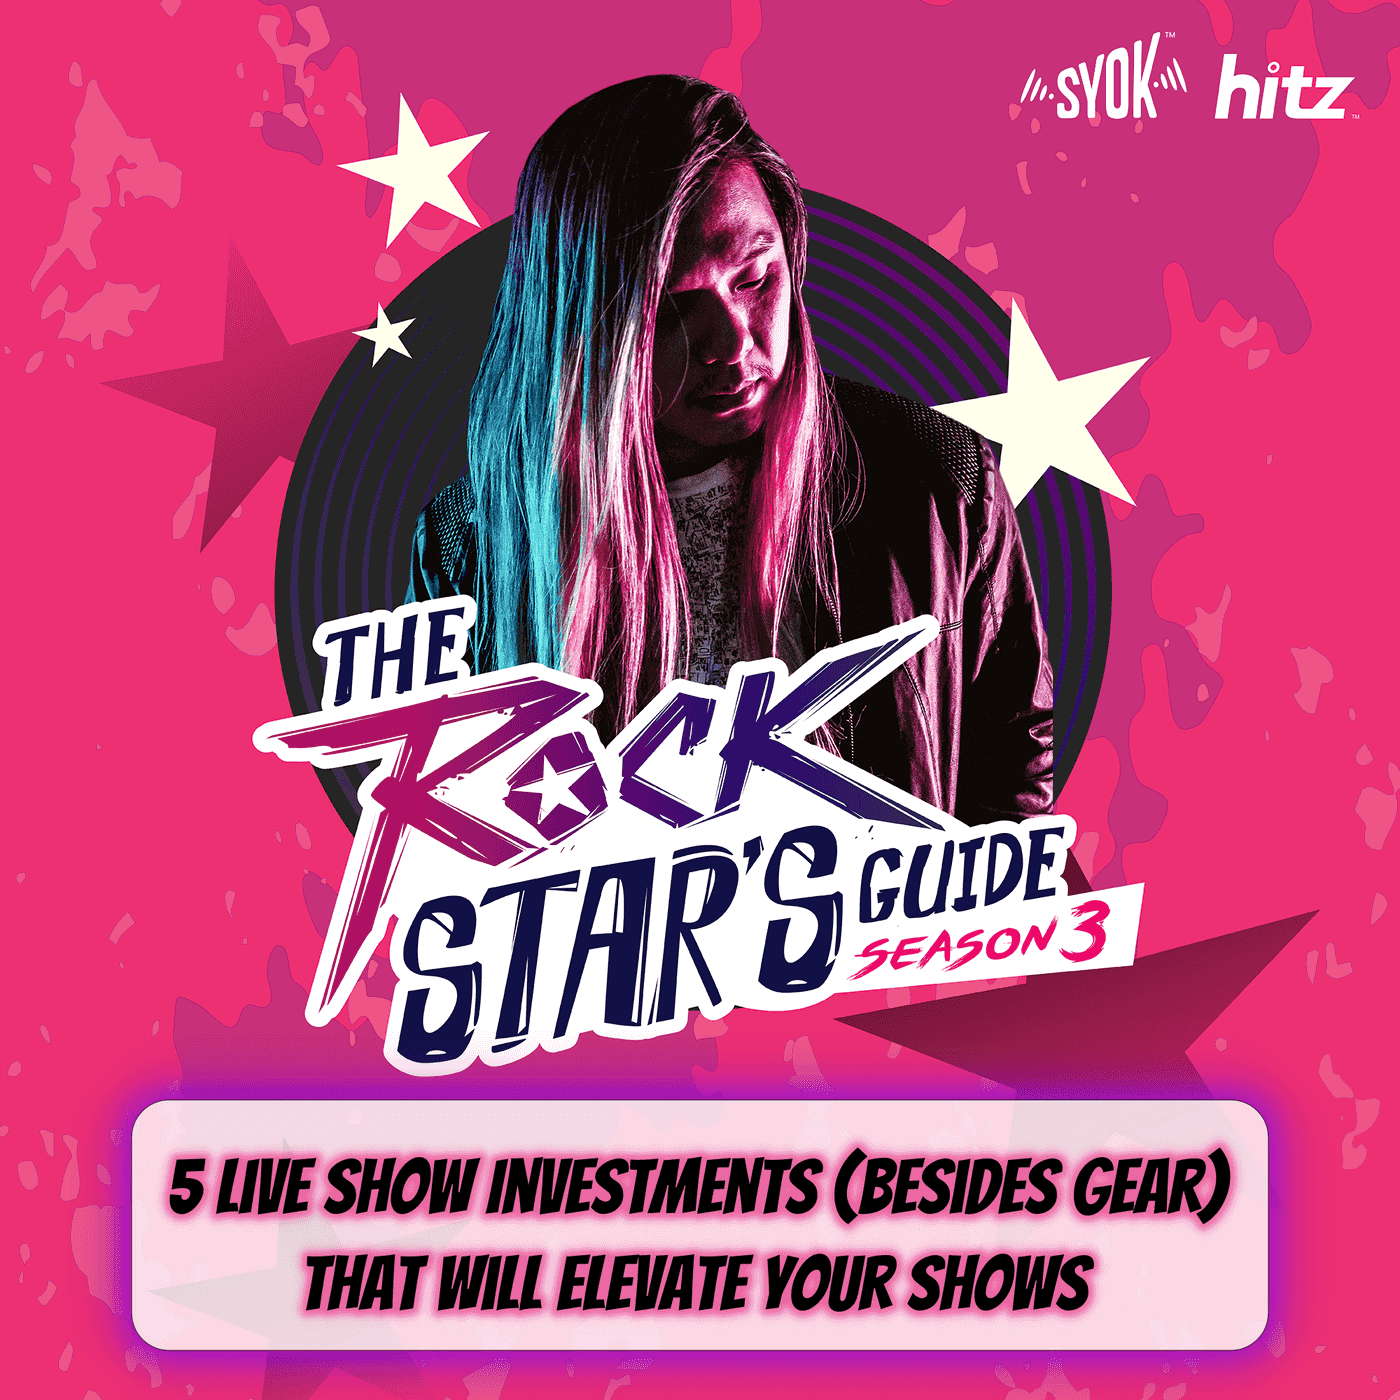 Live Show Investments (Besides Gear) That Will Elevate Your Shows | The Rockstar's Guide S3E14